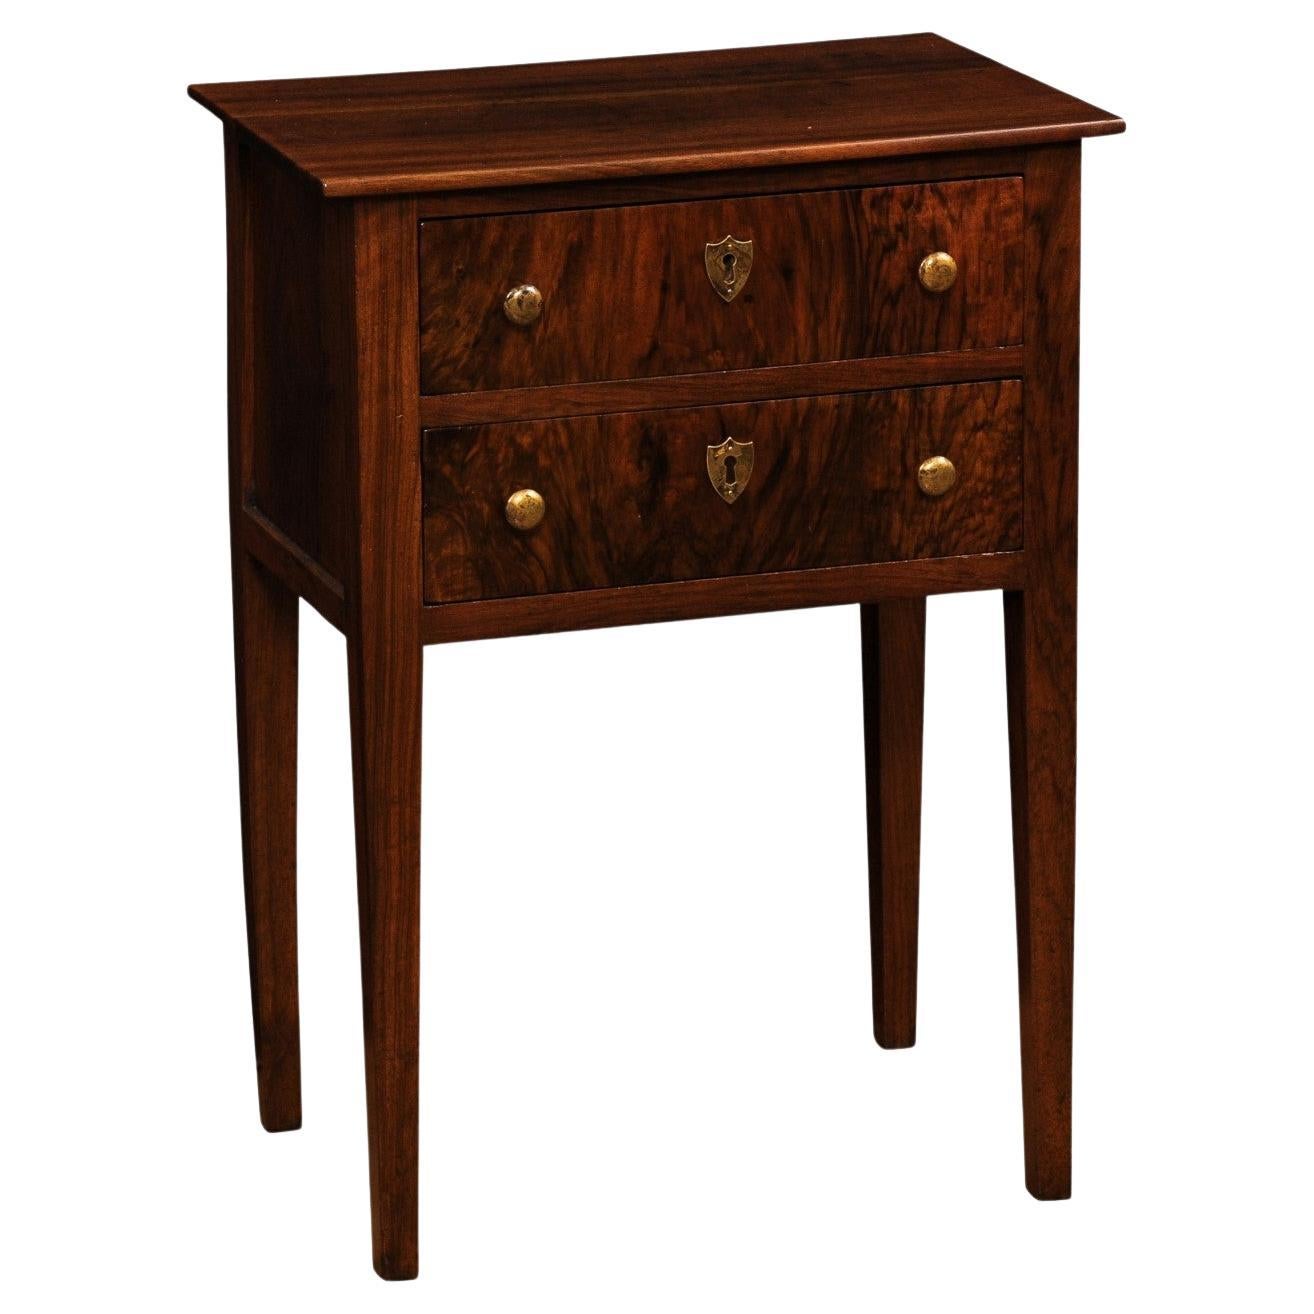 Italian Directoire 19th Century Walnut Bedside Table with Two Veneered Drawers For Sale